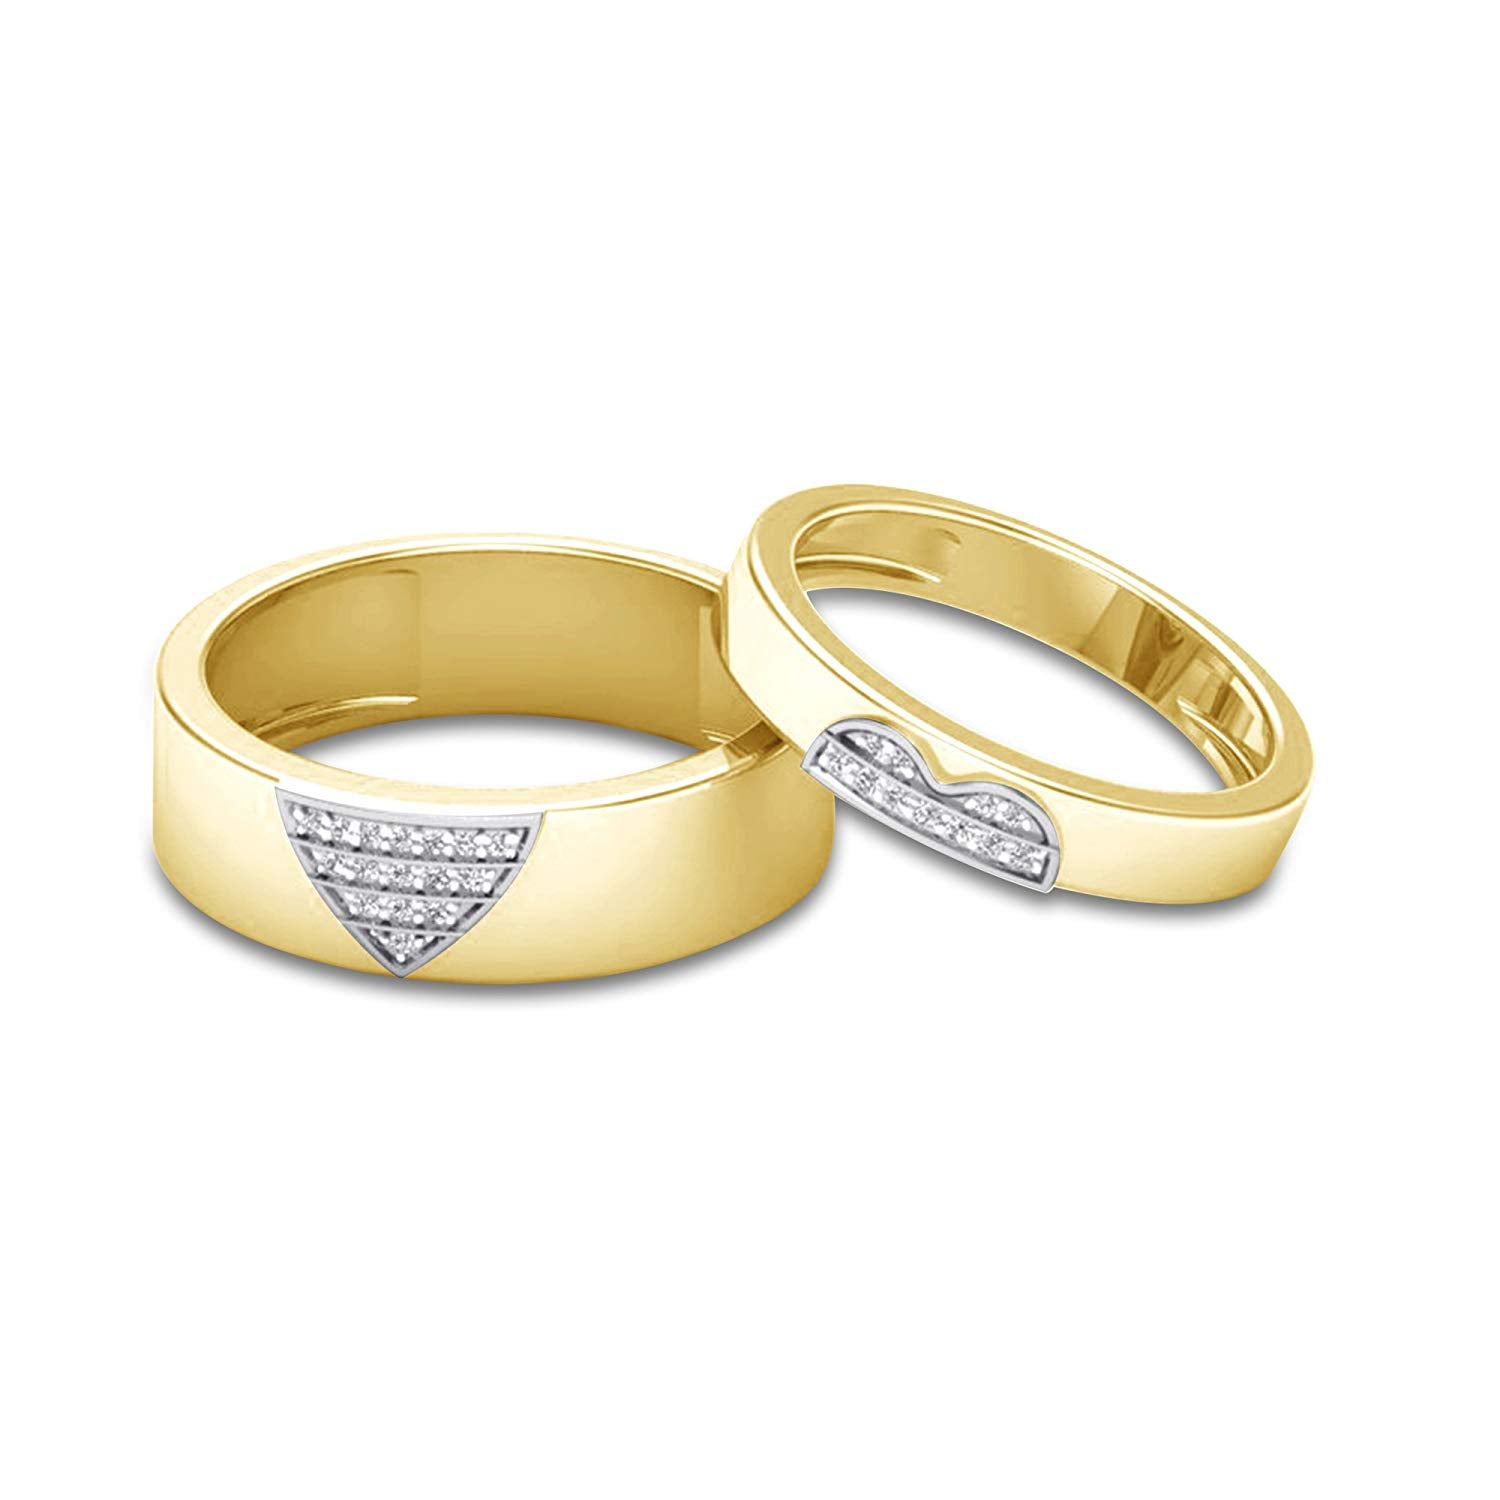 3Diamonds Twins Cloves 91 Couple Ring Gold Plated 16 Mm - Gold